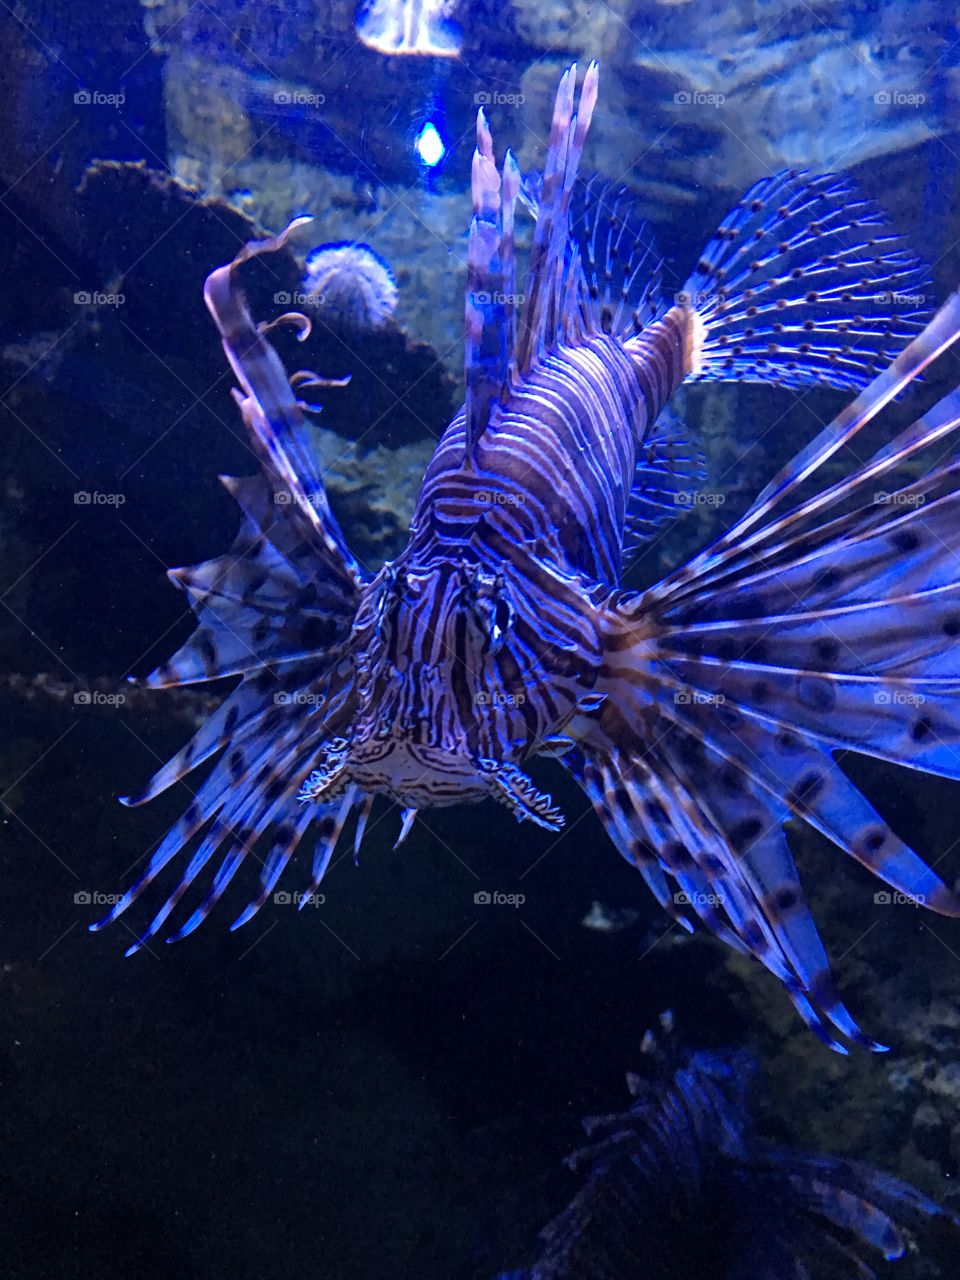 A beautiful close up of the Lionfish under blue lights, elegant and graceful. 